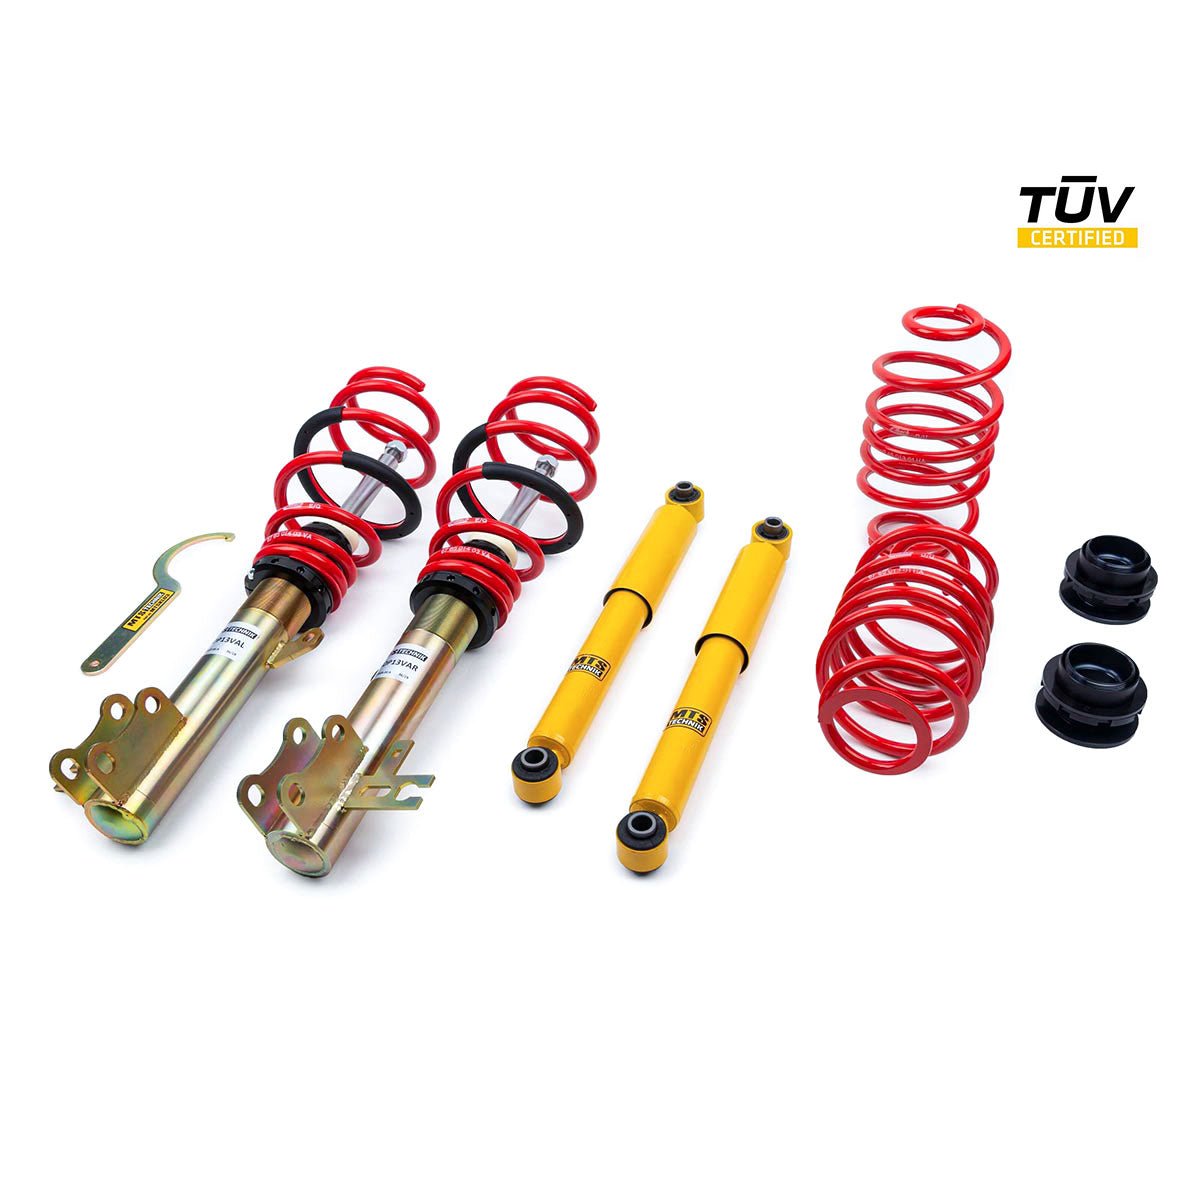 MTS TECHNIK coilover kit STREET Opel Astra H station wagon (with TÜV) - PARTS33 GmbH